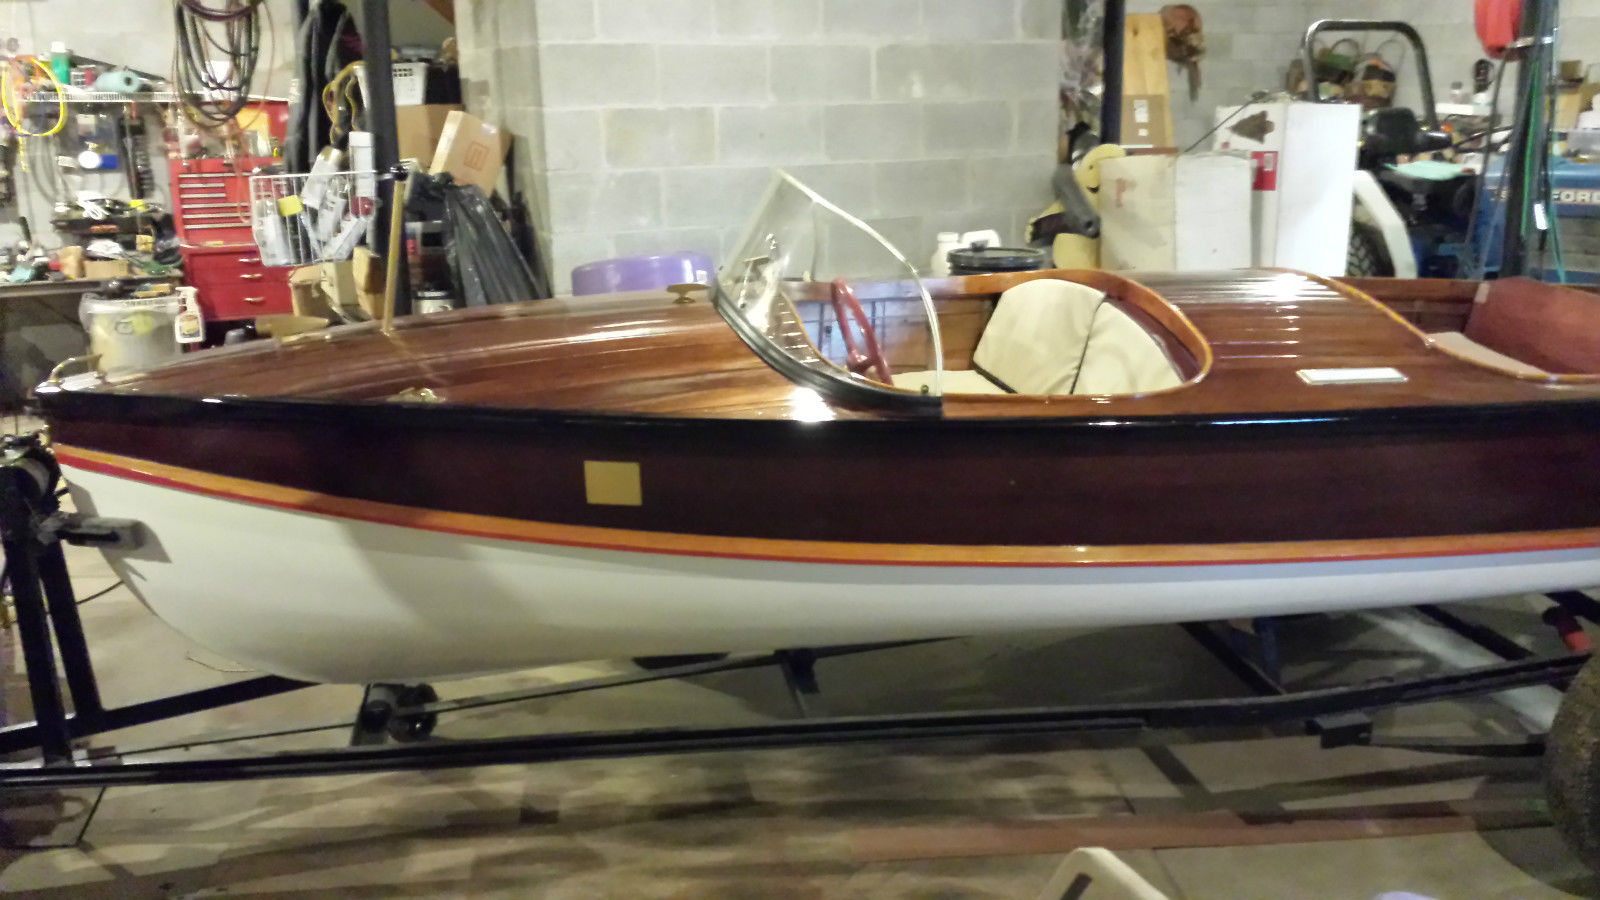 Wagemaker Wolverine 1953 for sale for $3,250 - Boats-from ...